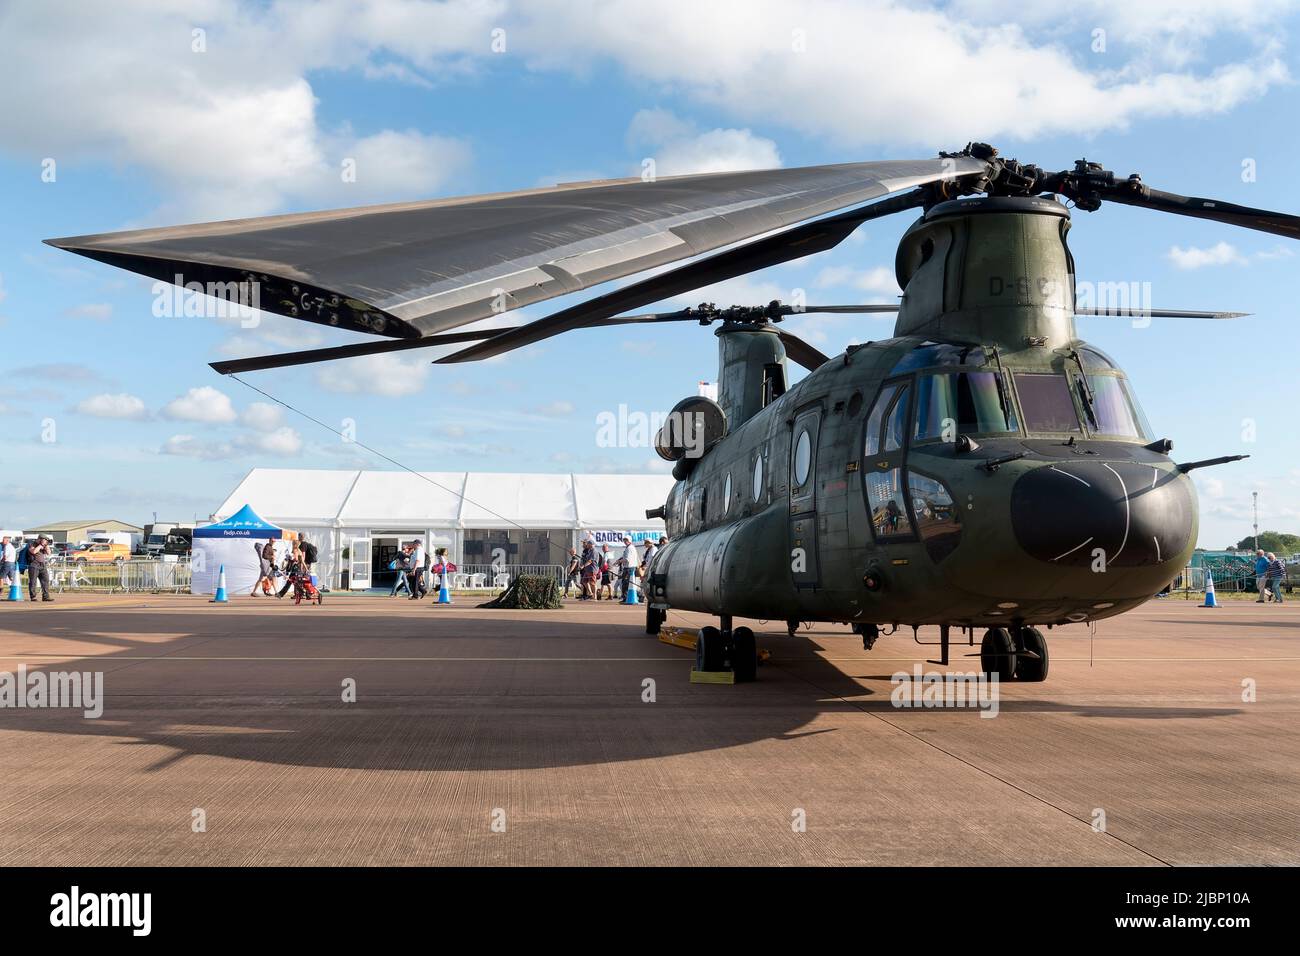 Fairford, Gloucestershire, Regno Unito - Luglio 2019: No 298 Squadron Royal Netherlands Air Force (Koninklijke Luchtmacht) CH-47D Chinook elicottero pesante (. Foto Stock